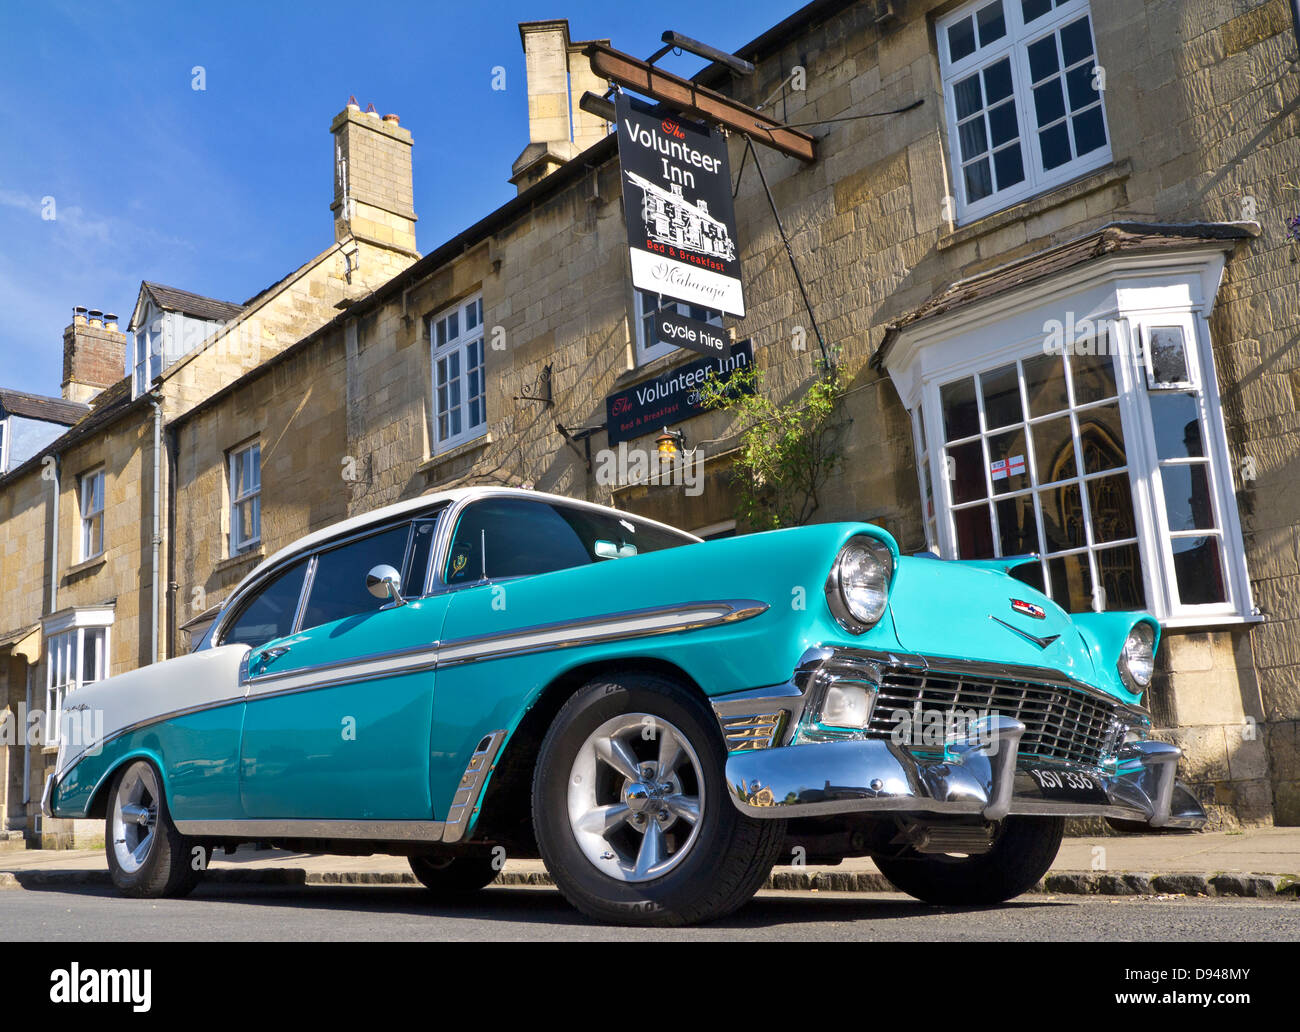 1950's/60's Chevrolet Bel Air Hardtop American classic car outside a Cotswolds B&B public house Stock Photo